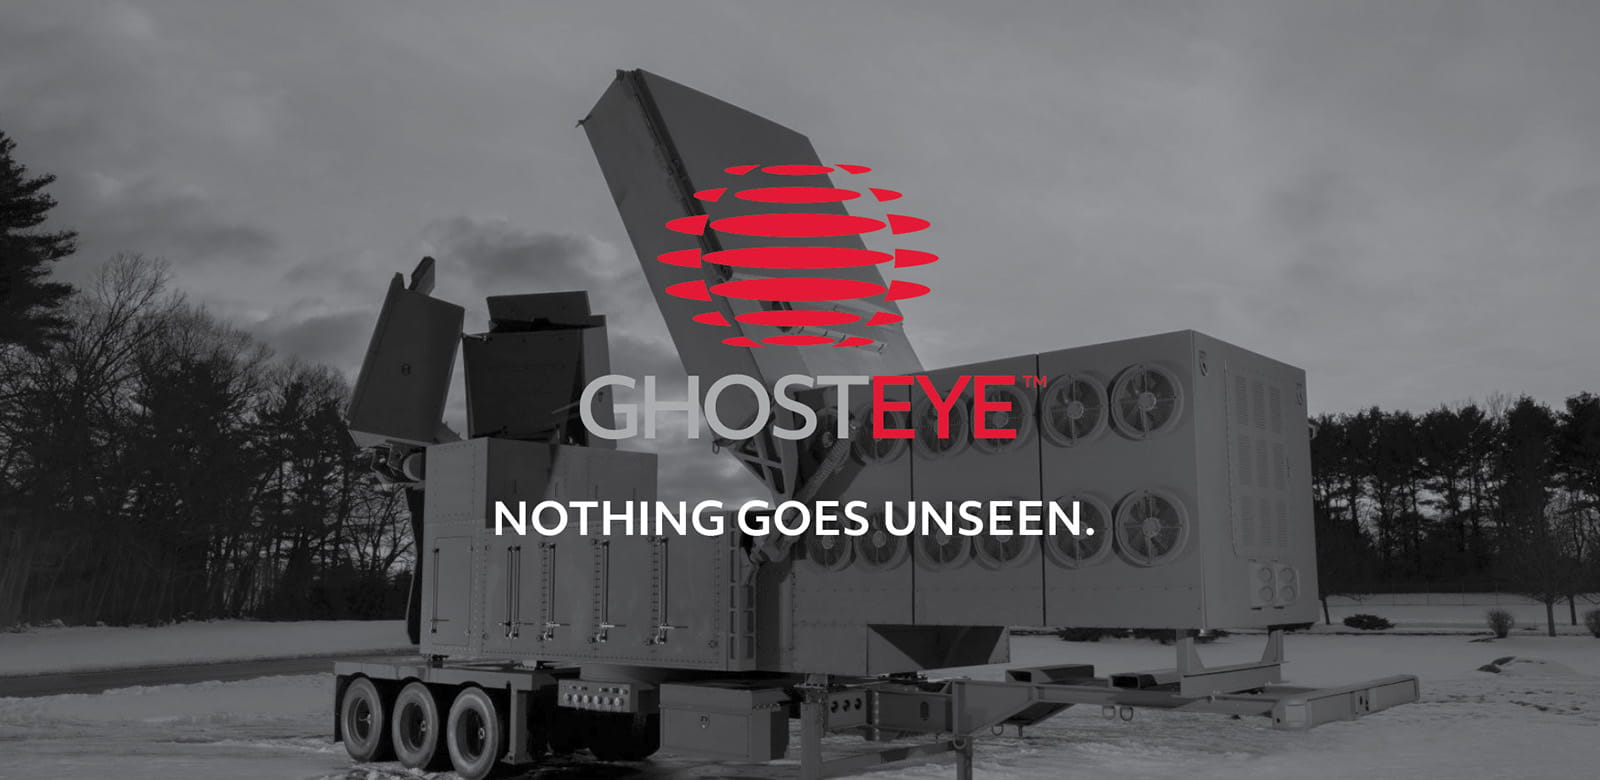 GhostEye Nothing Goes Unseen